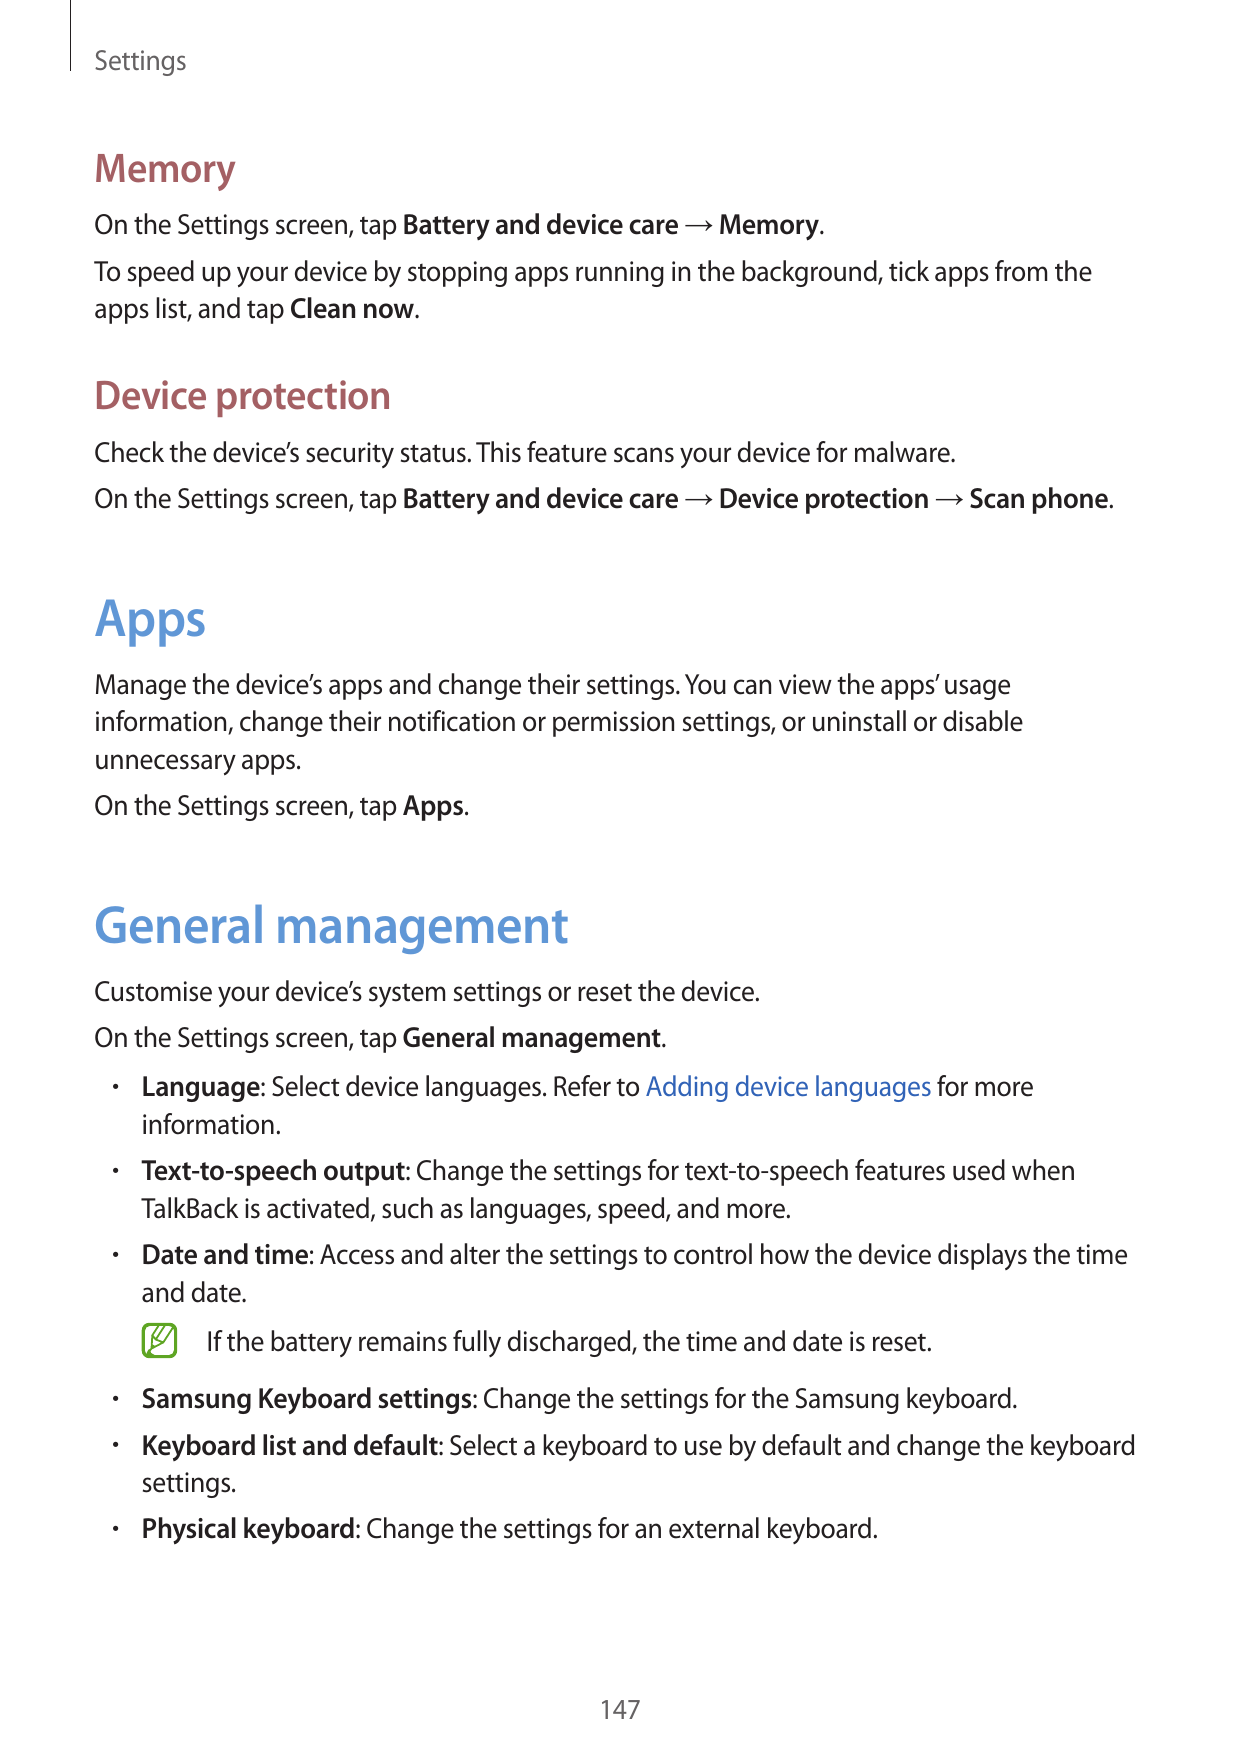 SettingsMemoryOn the Settings screen, tap Battery and device care → Memory.To speed up your device by stopping apps running in t